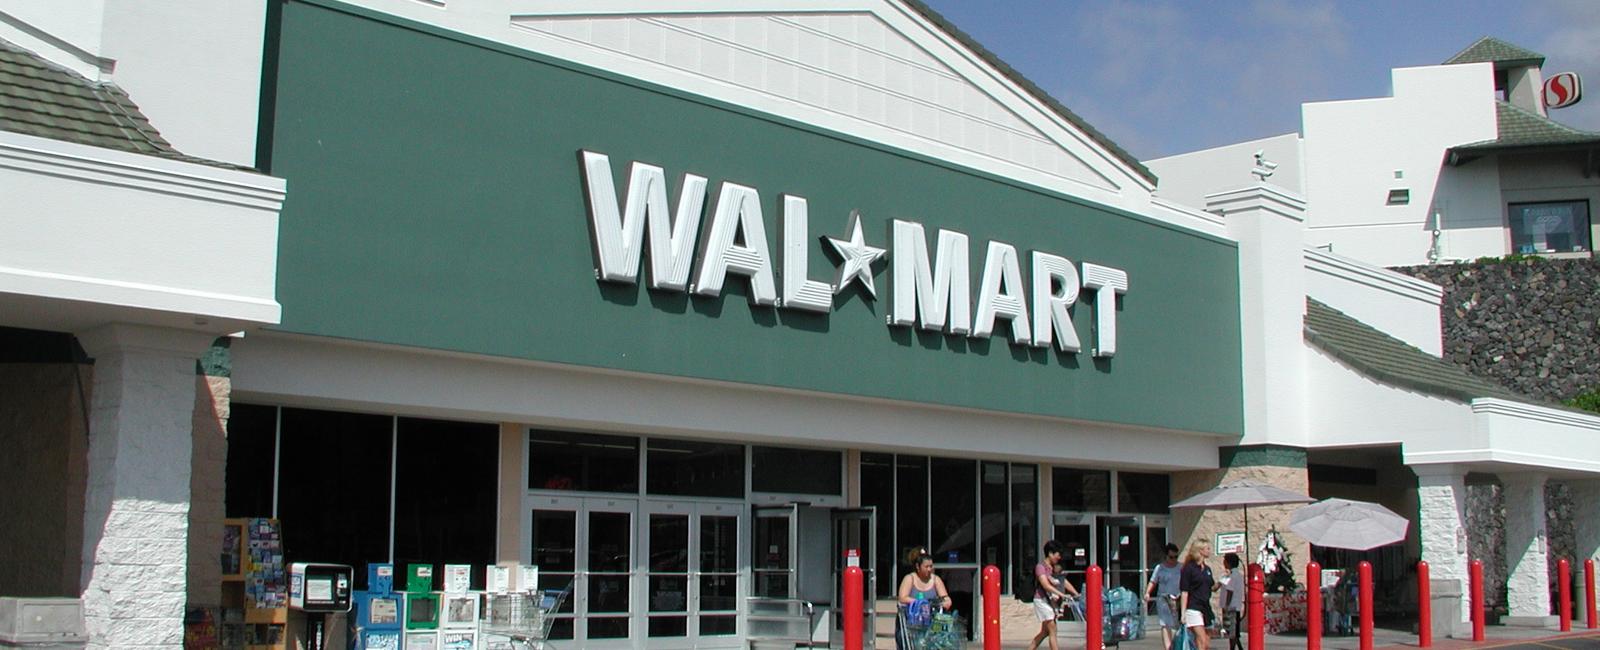 It s harder to get into walmart than into harvard harvard accepts 4 5 of applicants but walmart hires only 2 6